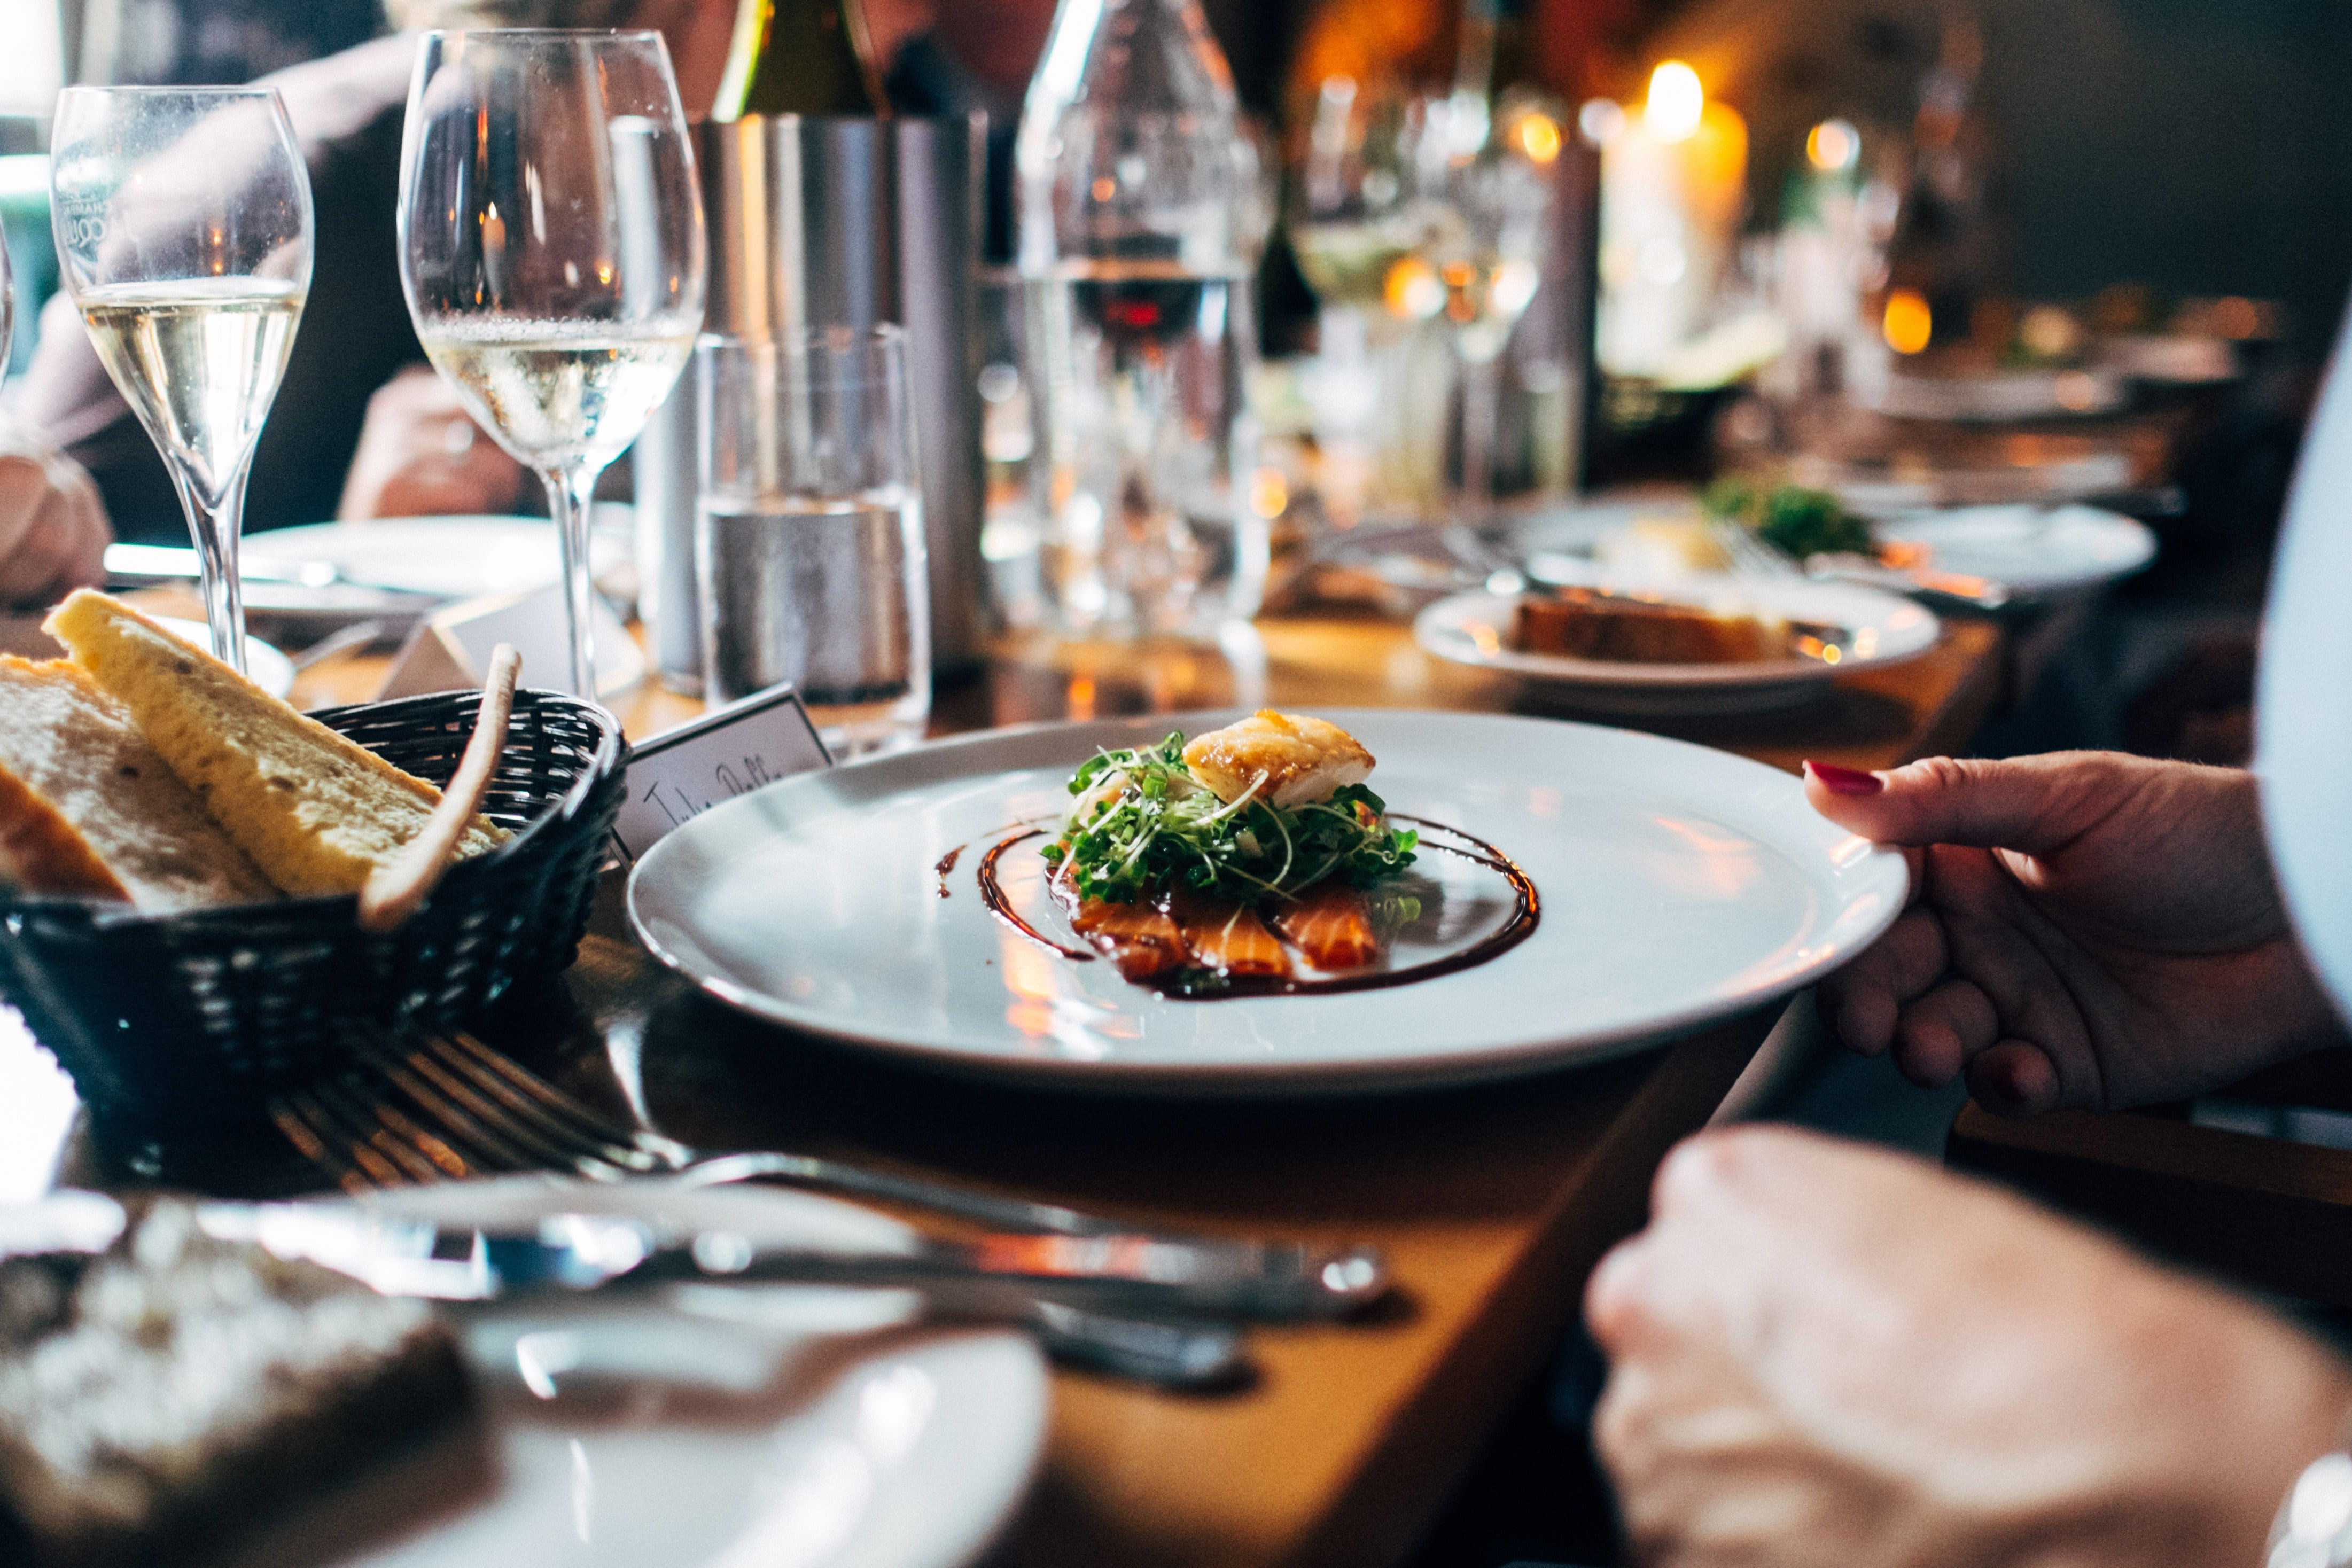 The restaurant became famous again. | Source: Unsplash